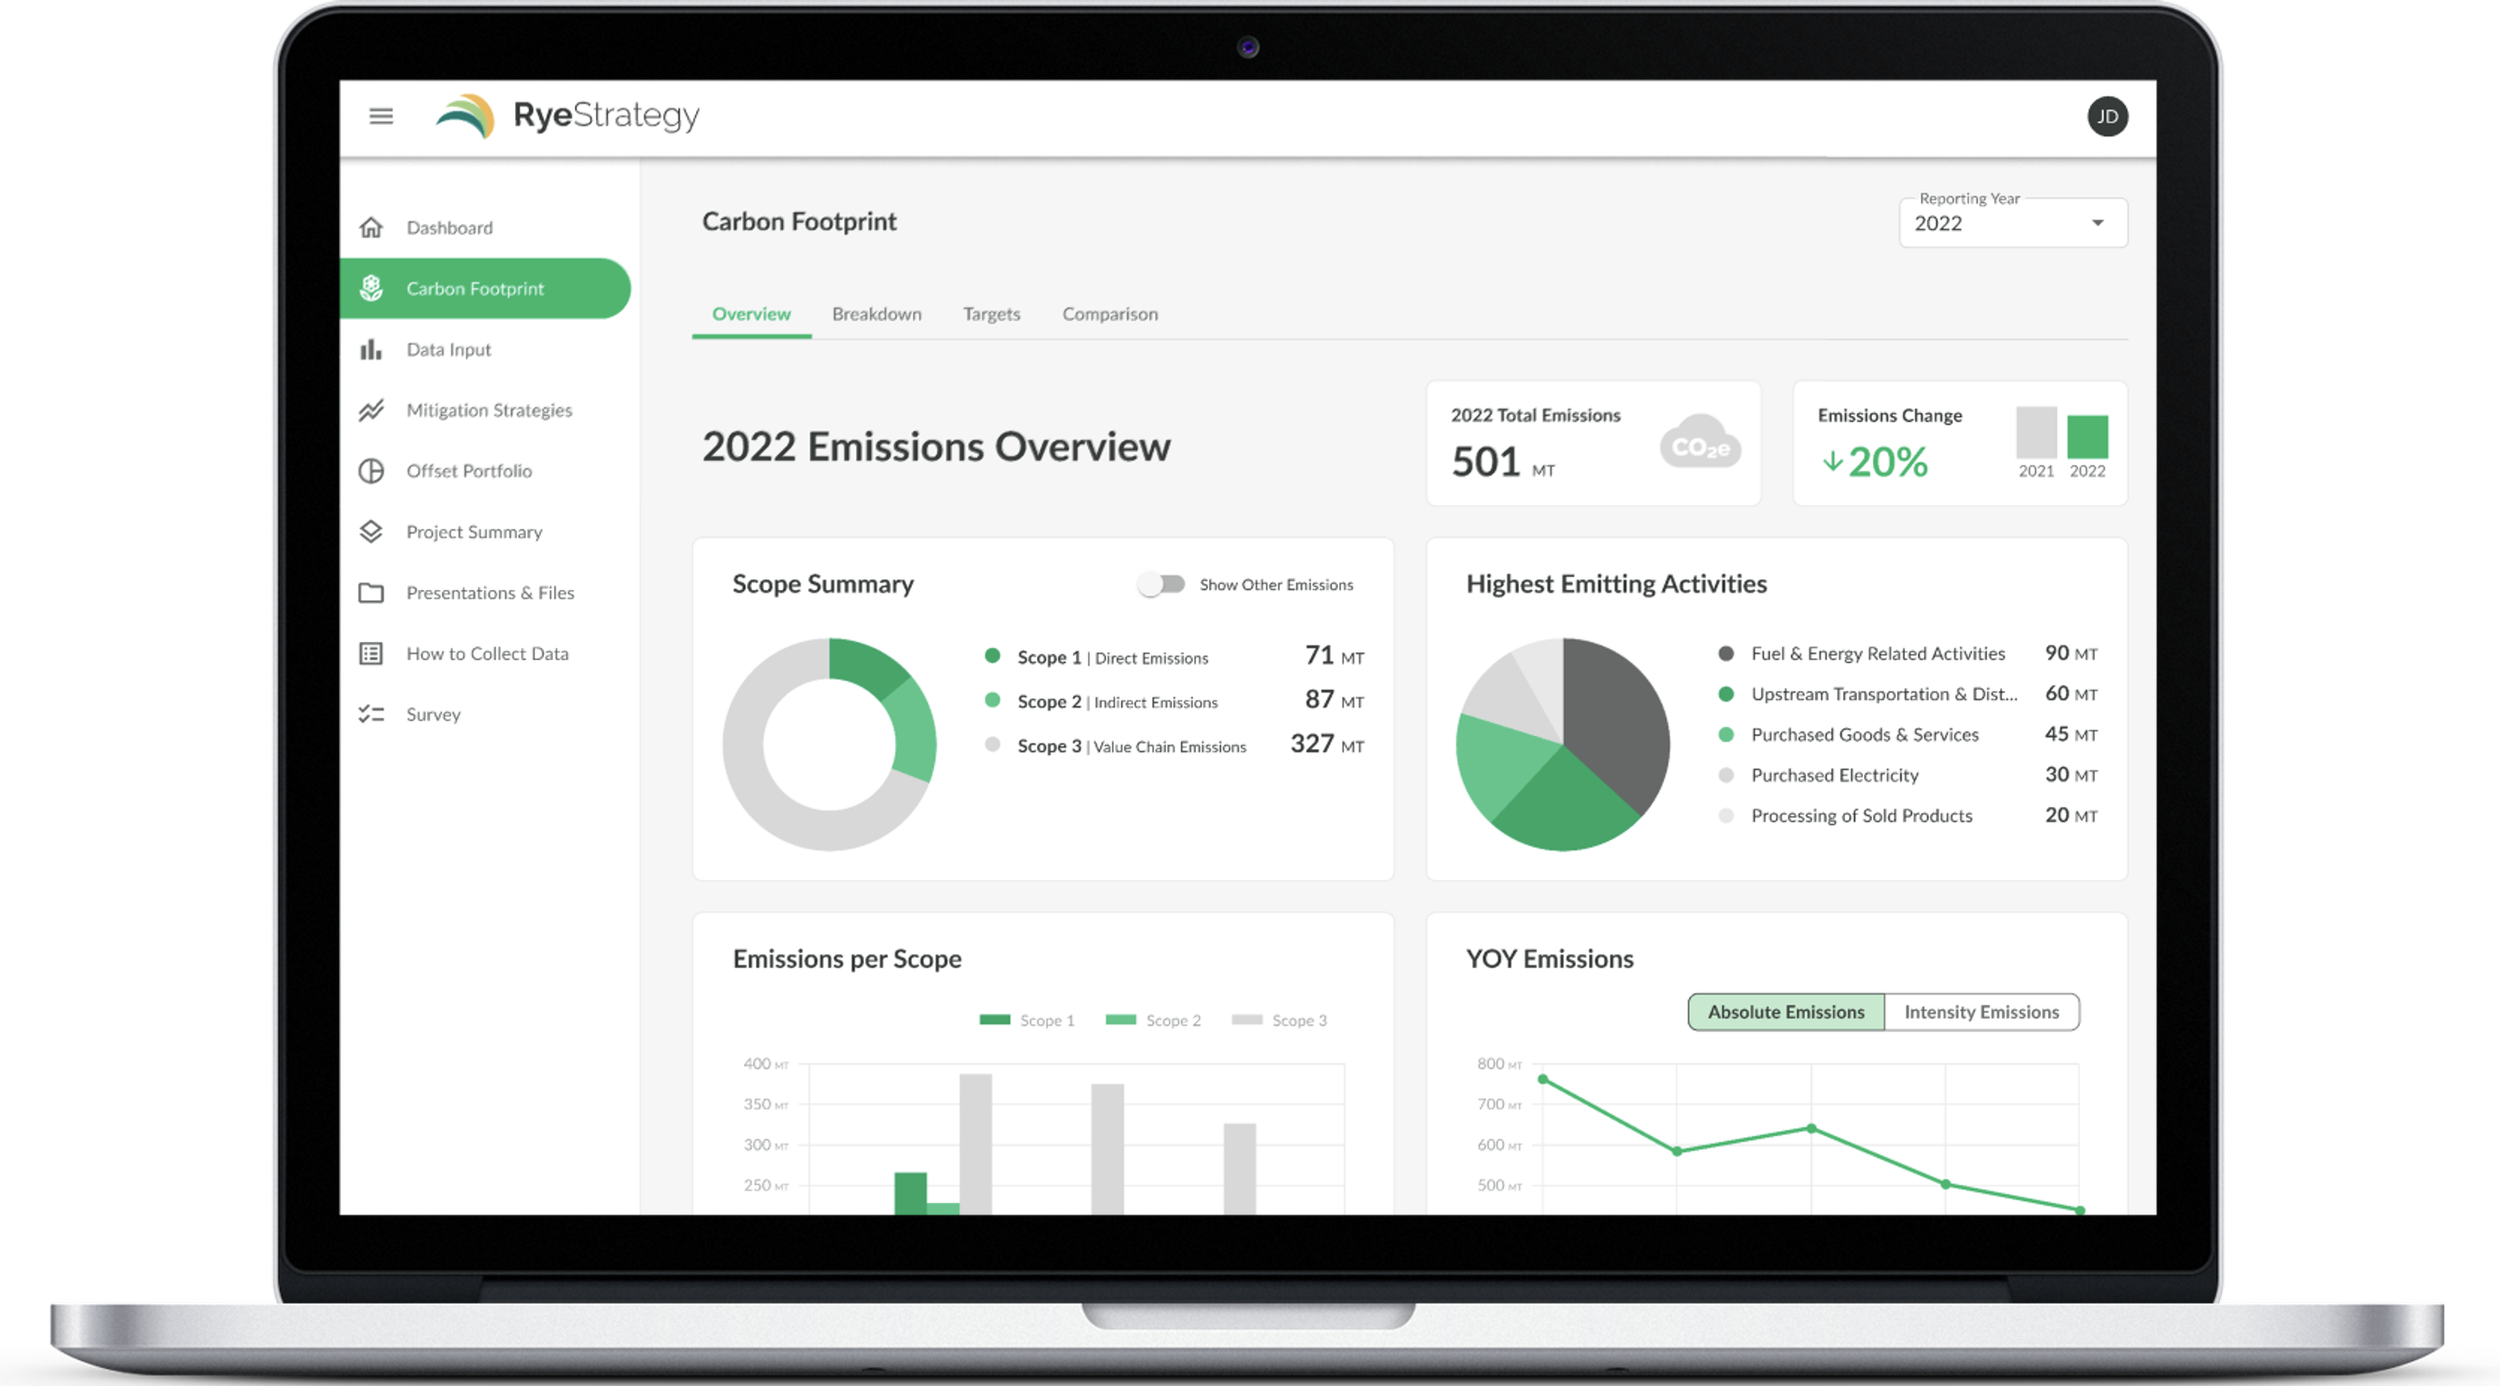 RyeStrategy carbon management software provides end-to-end support to help you reach your carbon emissions reduction targets. Our guided data input, carbon footprint reports, and mitigation strategy library support you on your climate journey.